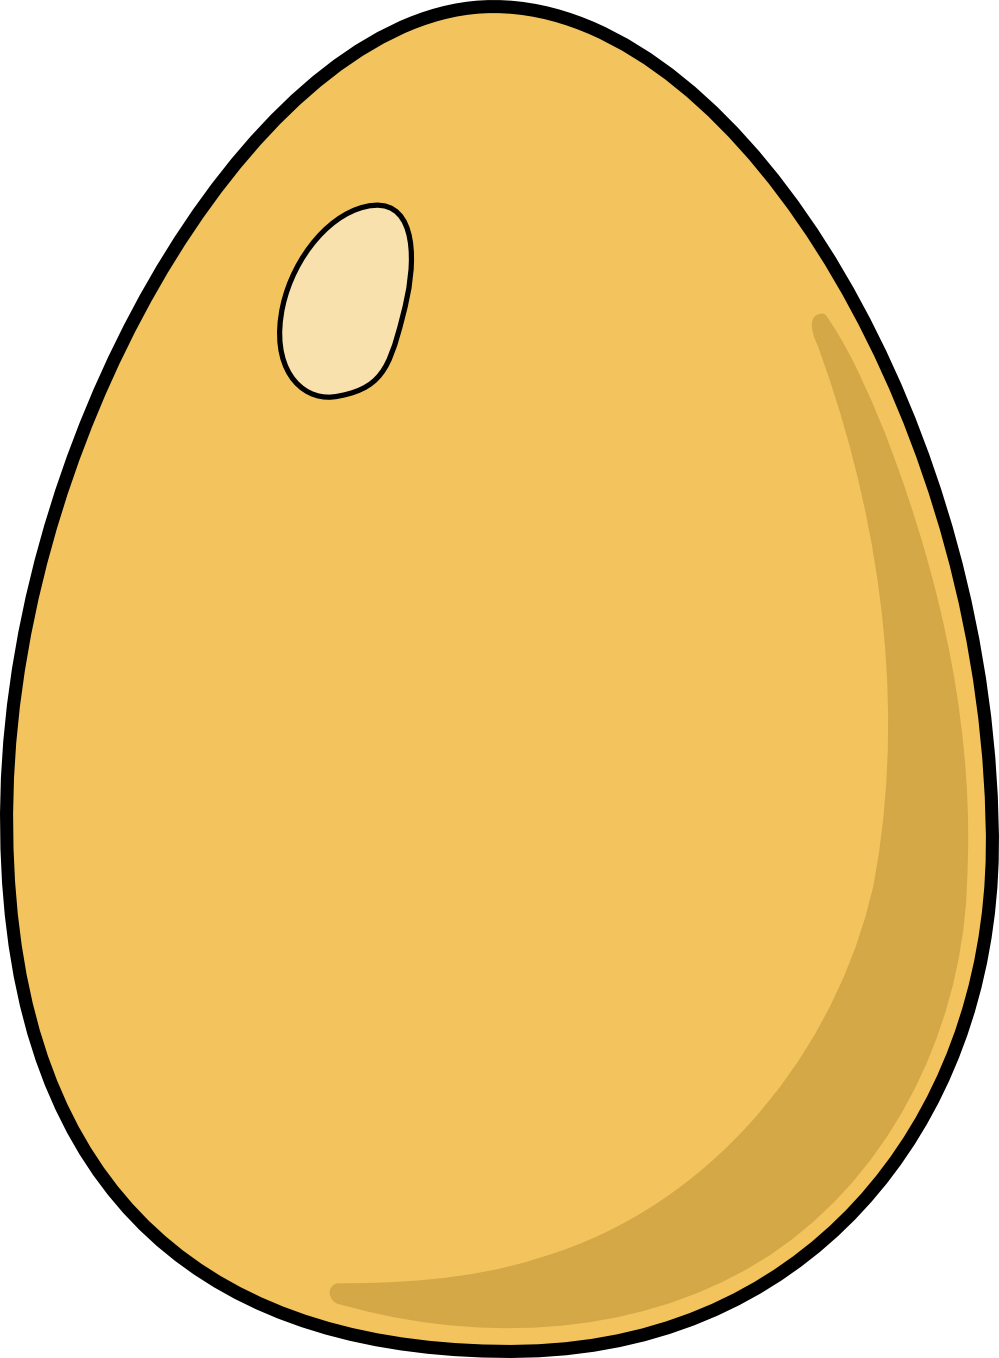 Egg clipart #16, Download drawings